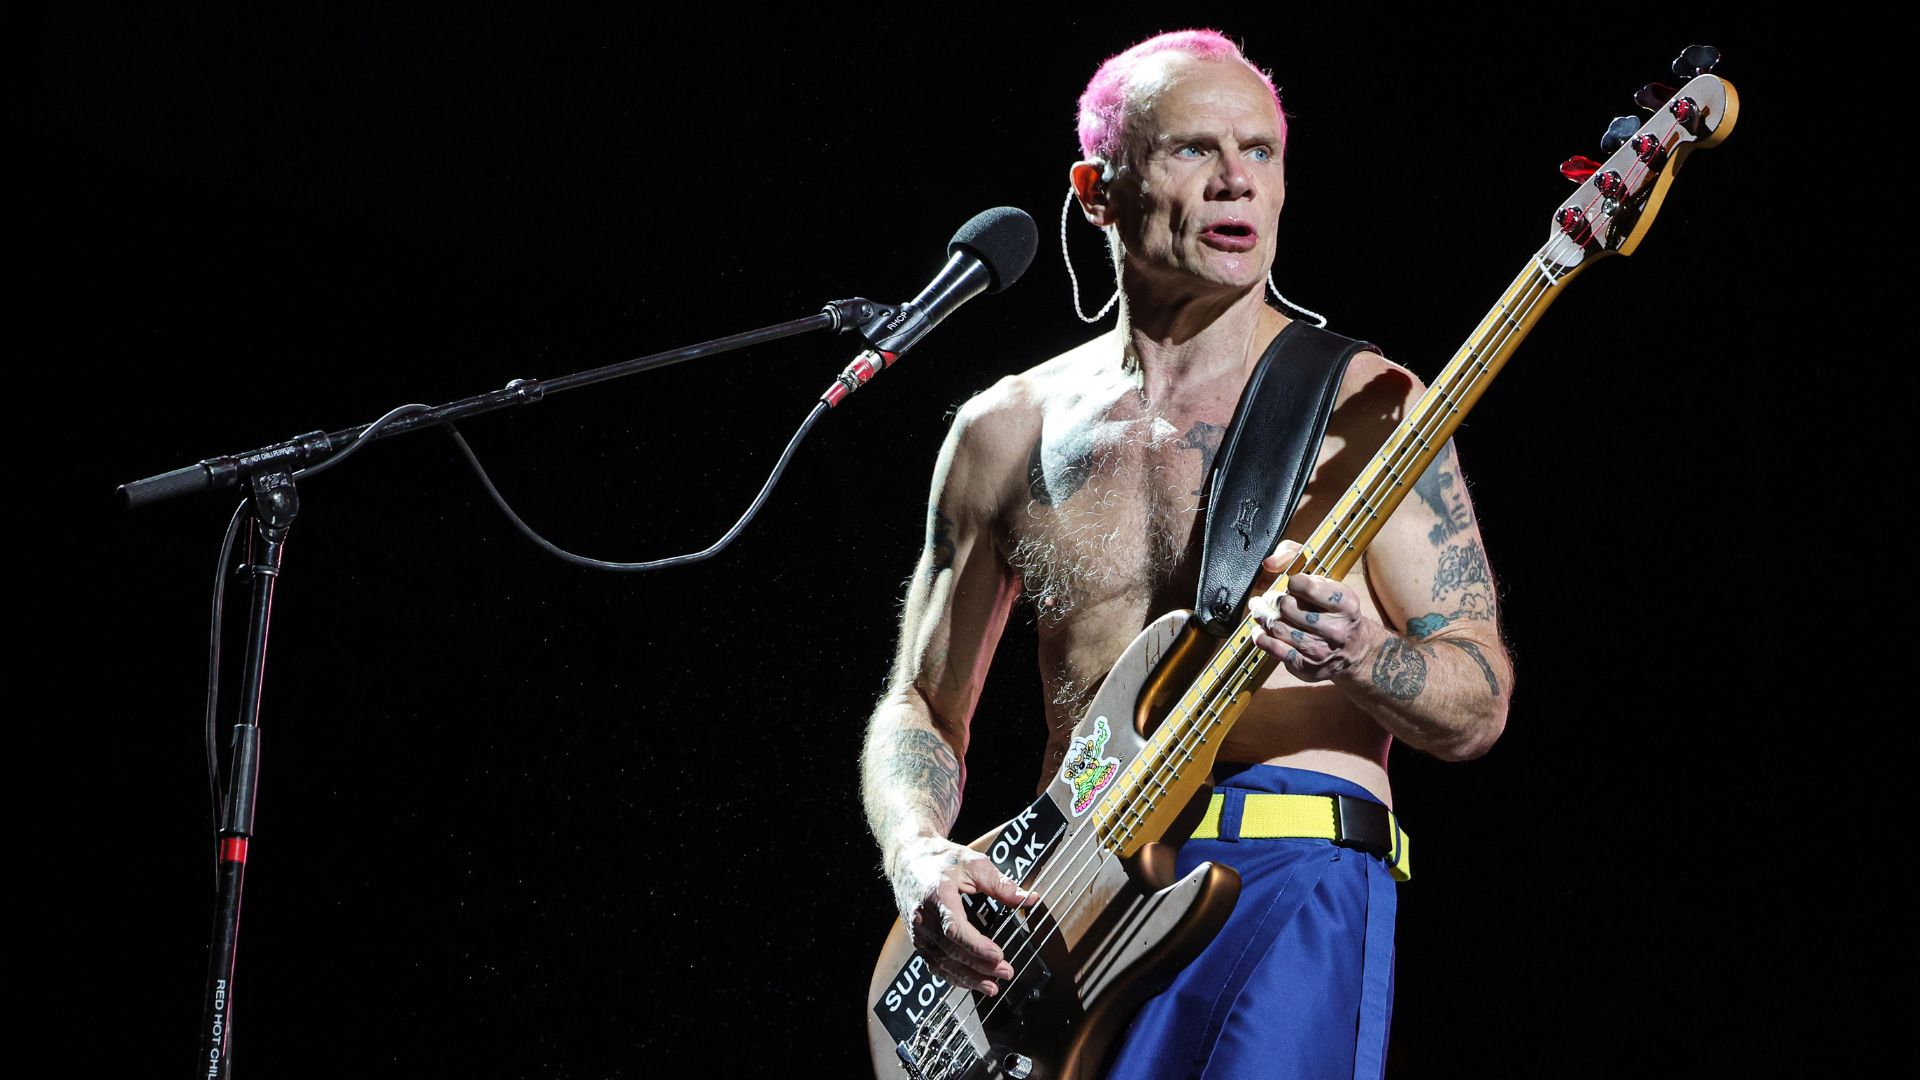 Flea on the stage with his guitar